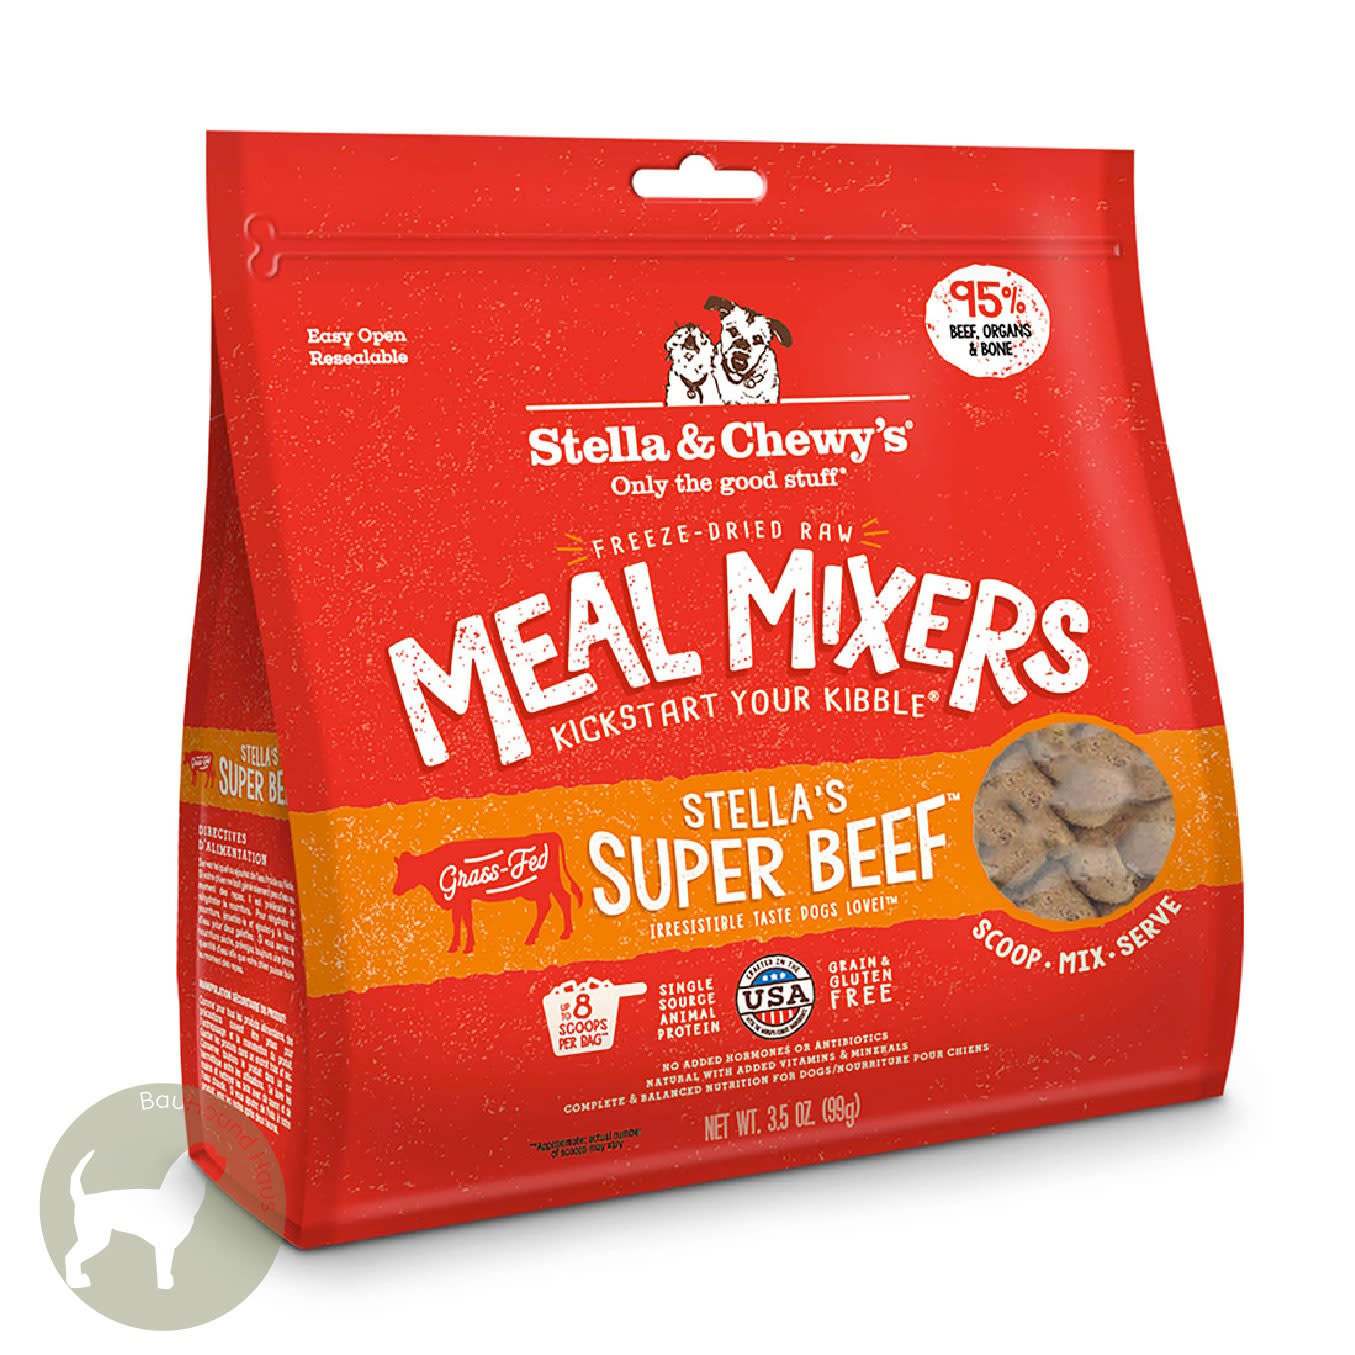 Stella & Chewy's Stella & Chewy's Meal Mixer Super Beef, 18oz